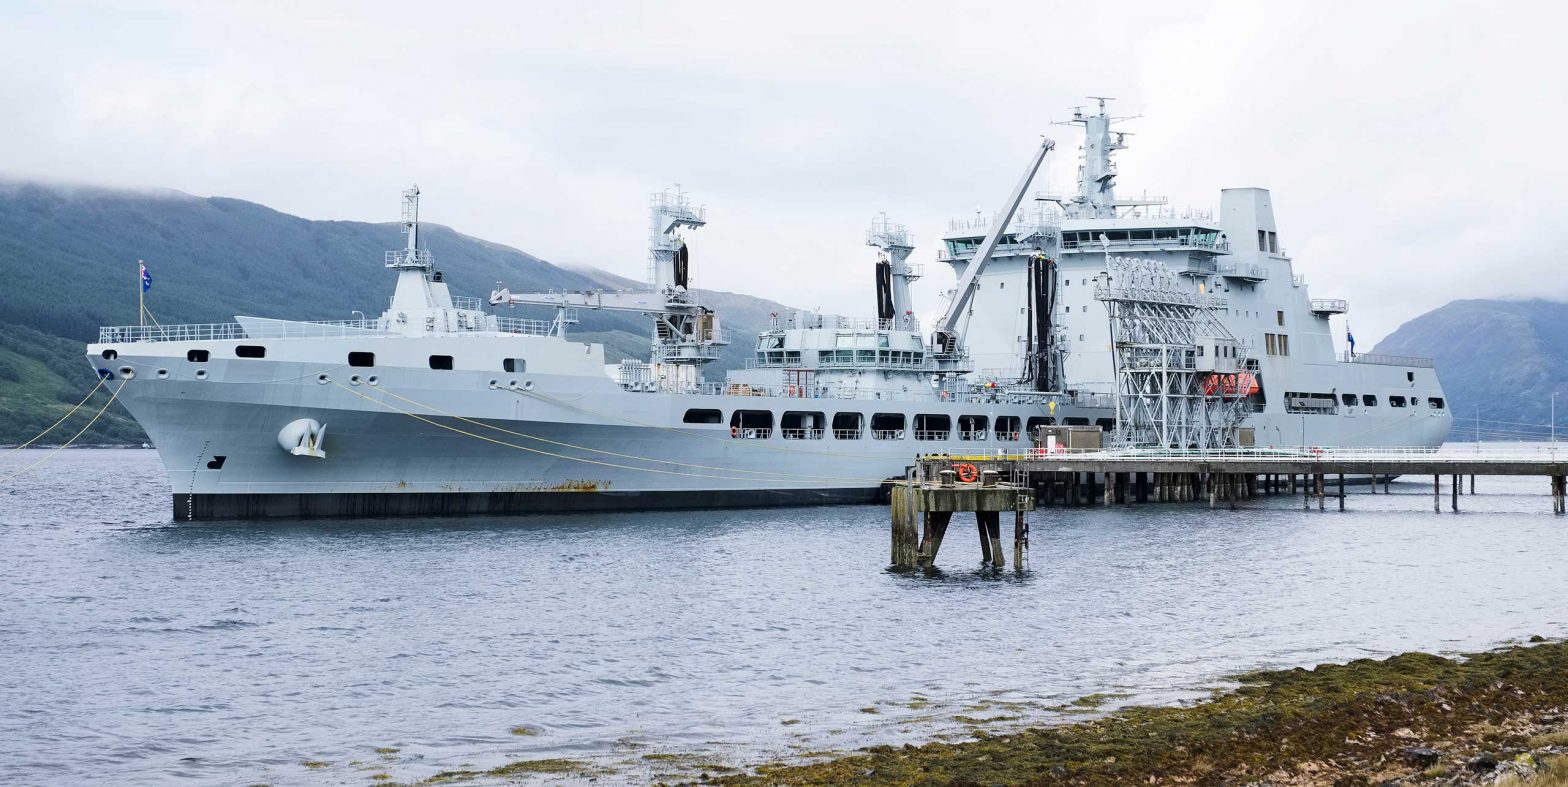 His Majesty’s Naval Base HMNB Clyde 